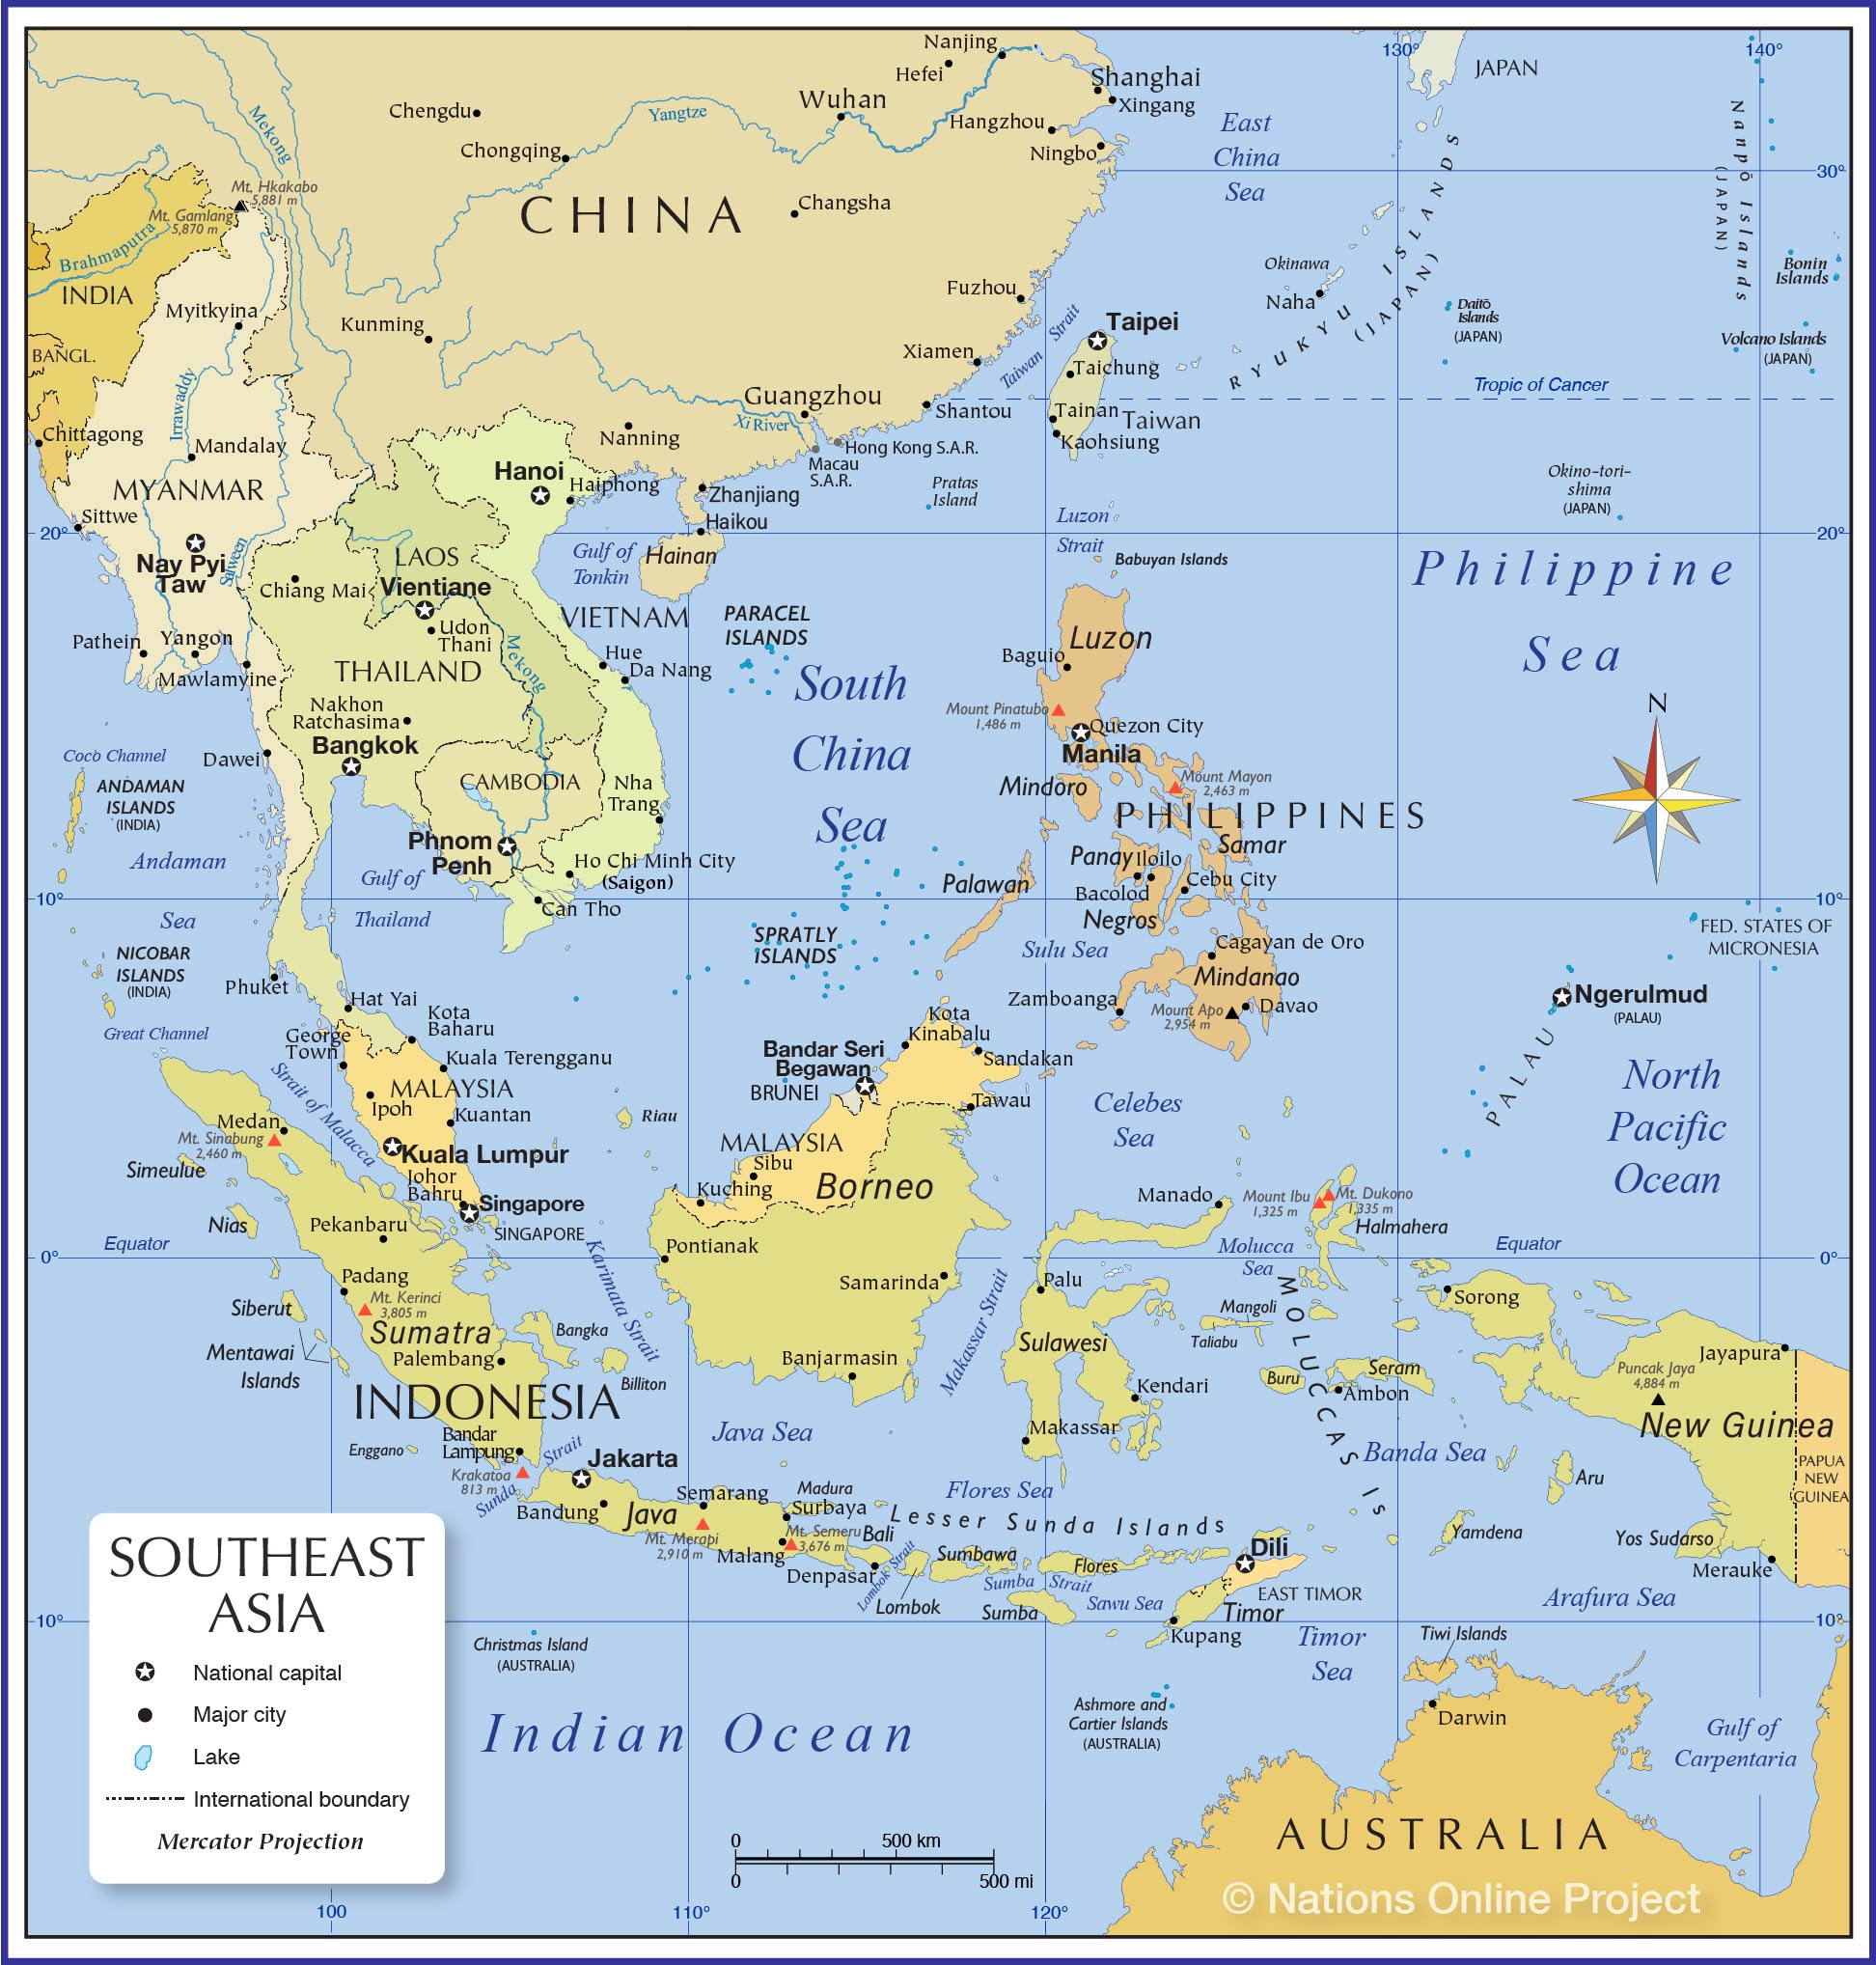 east and southeast asia political map Map Of South East Asia Nations Online Project east and southeast asia political map